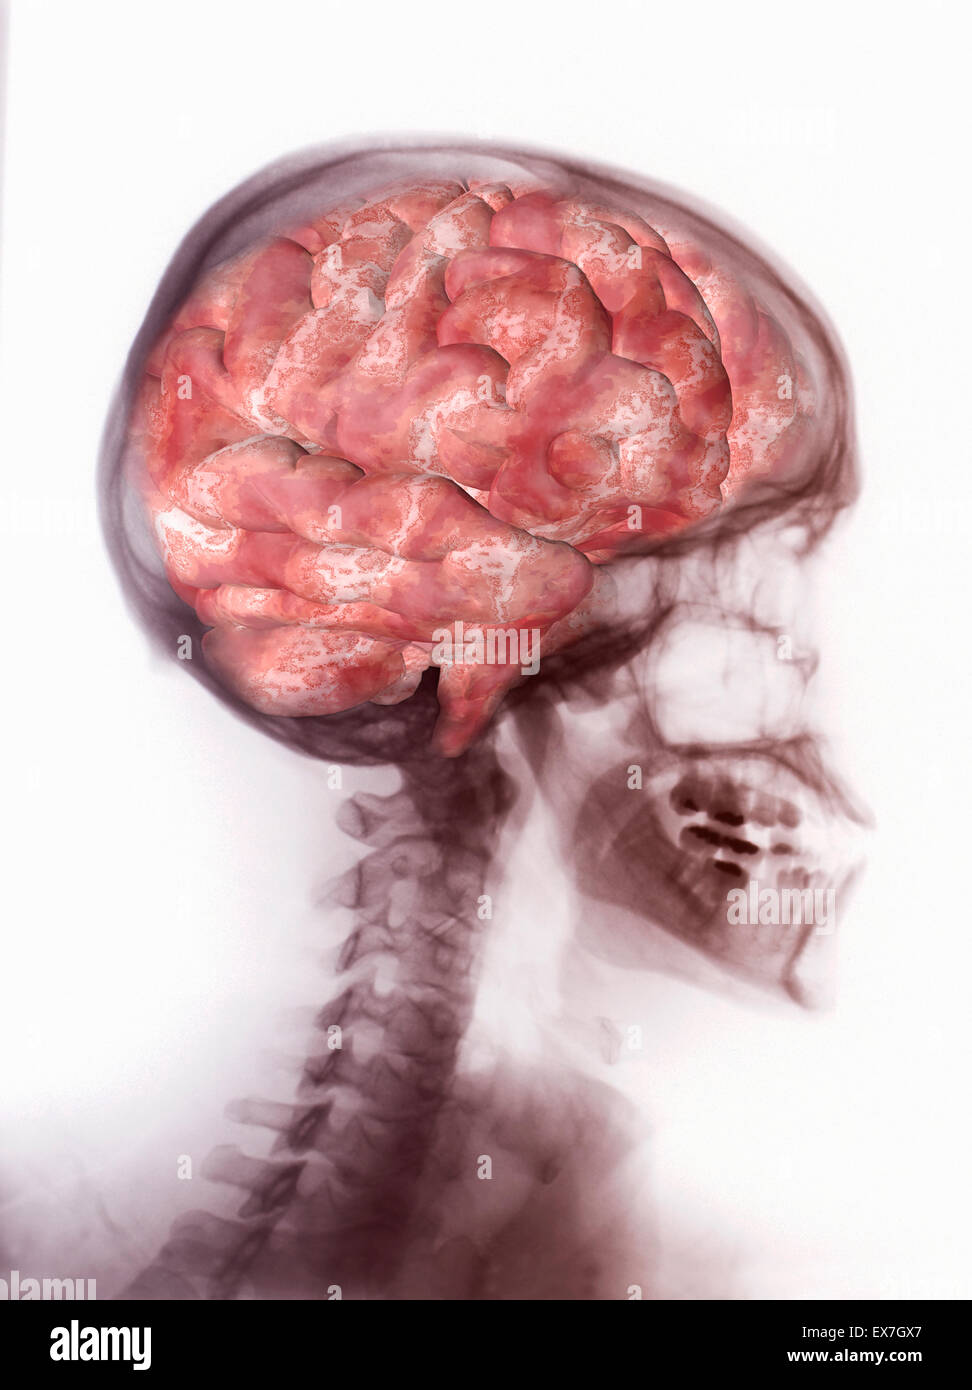 illustration of the human brain superimposed on the head and skull Stock Photo